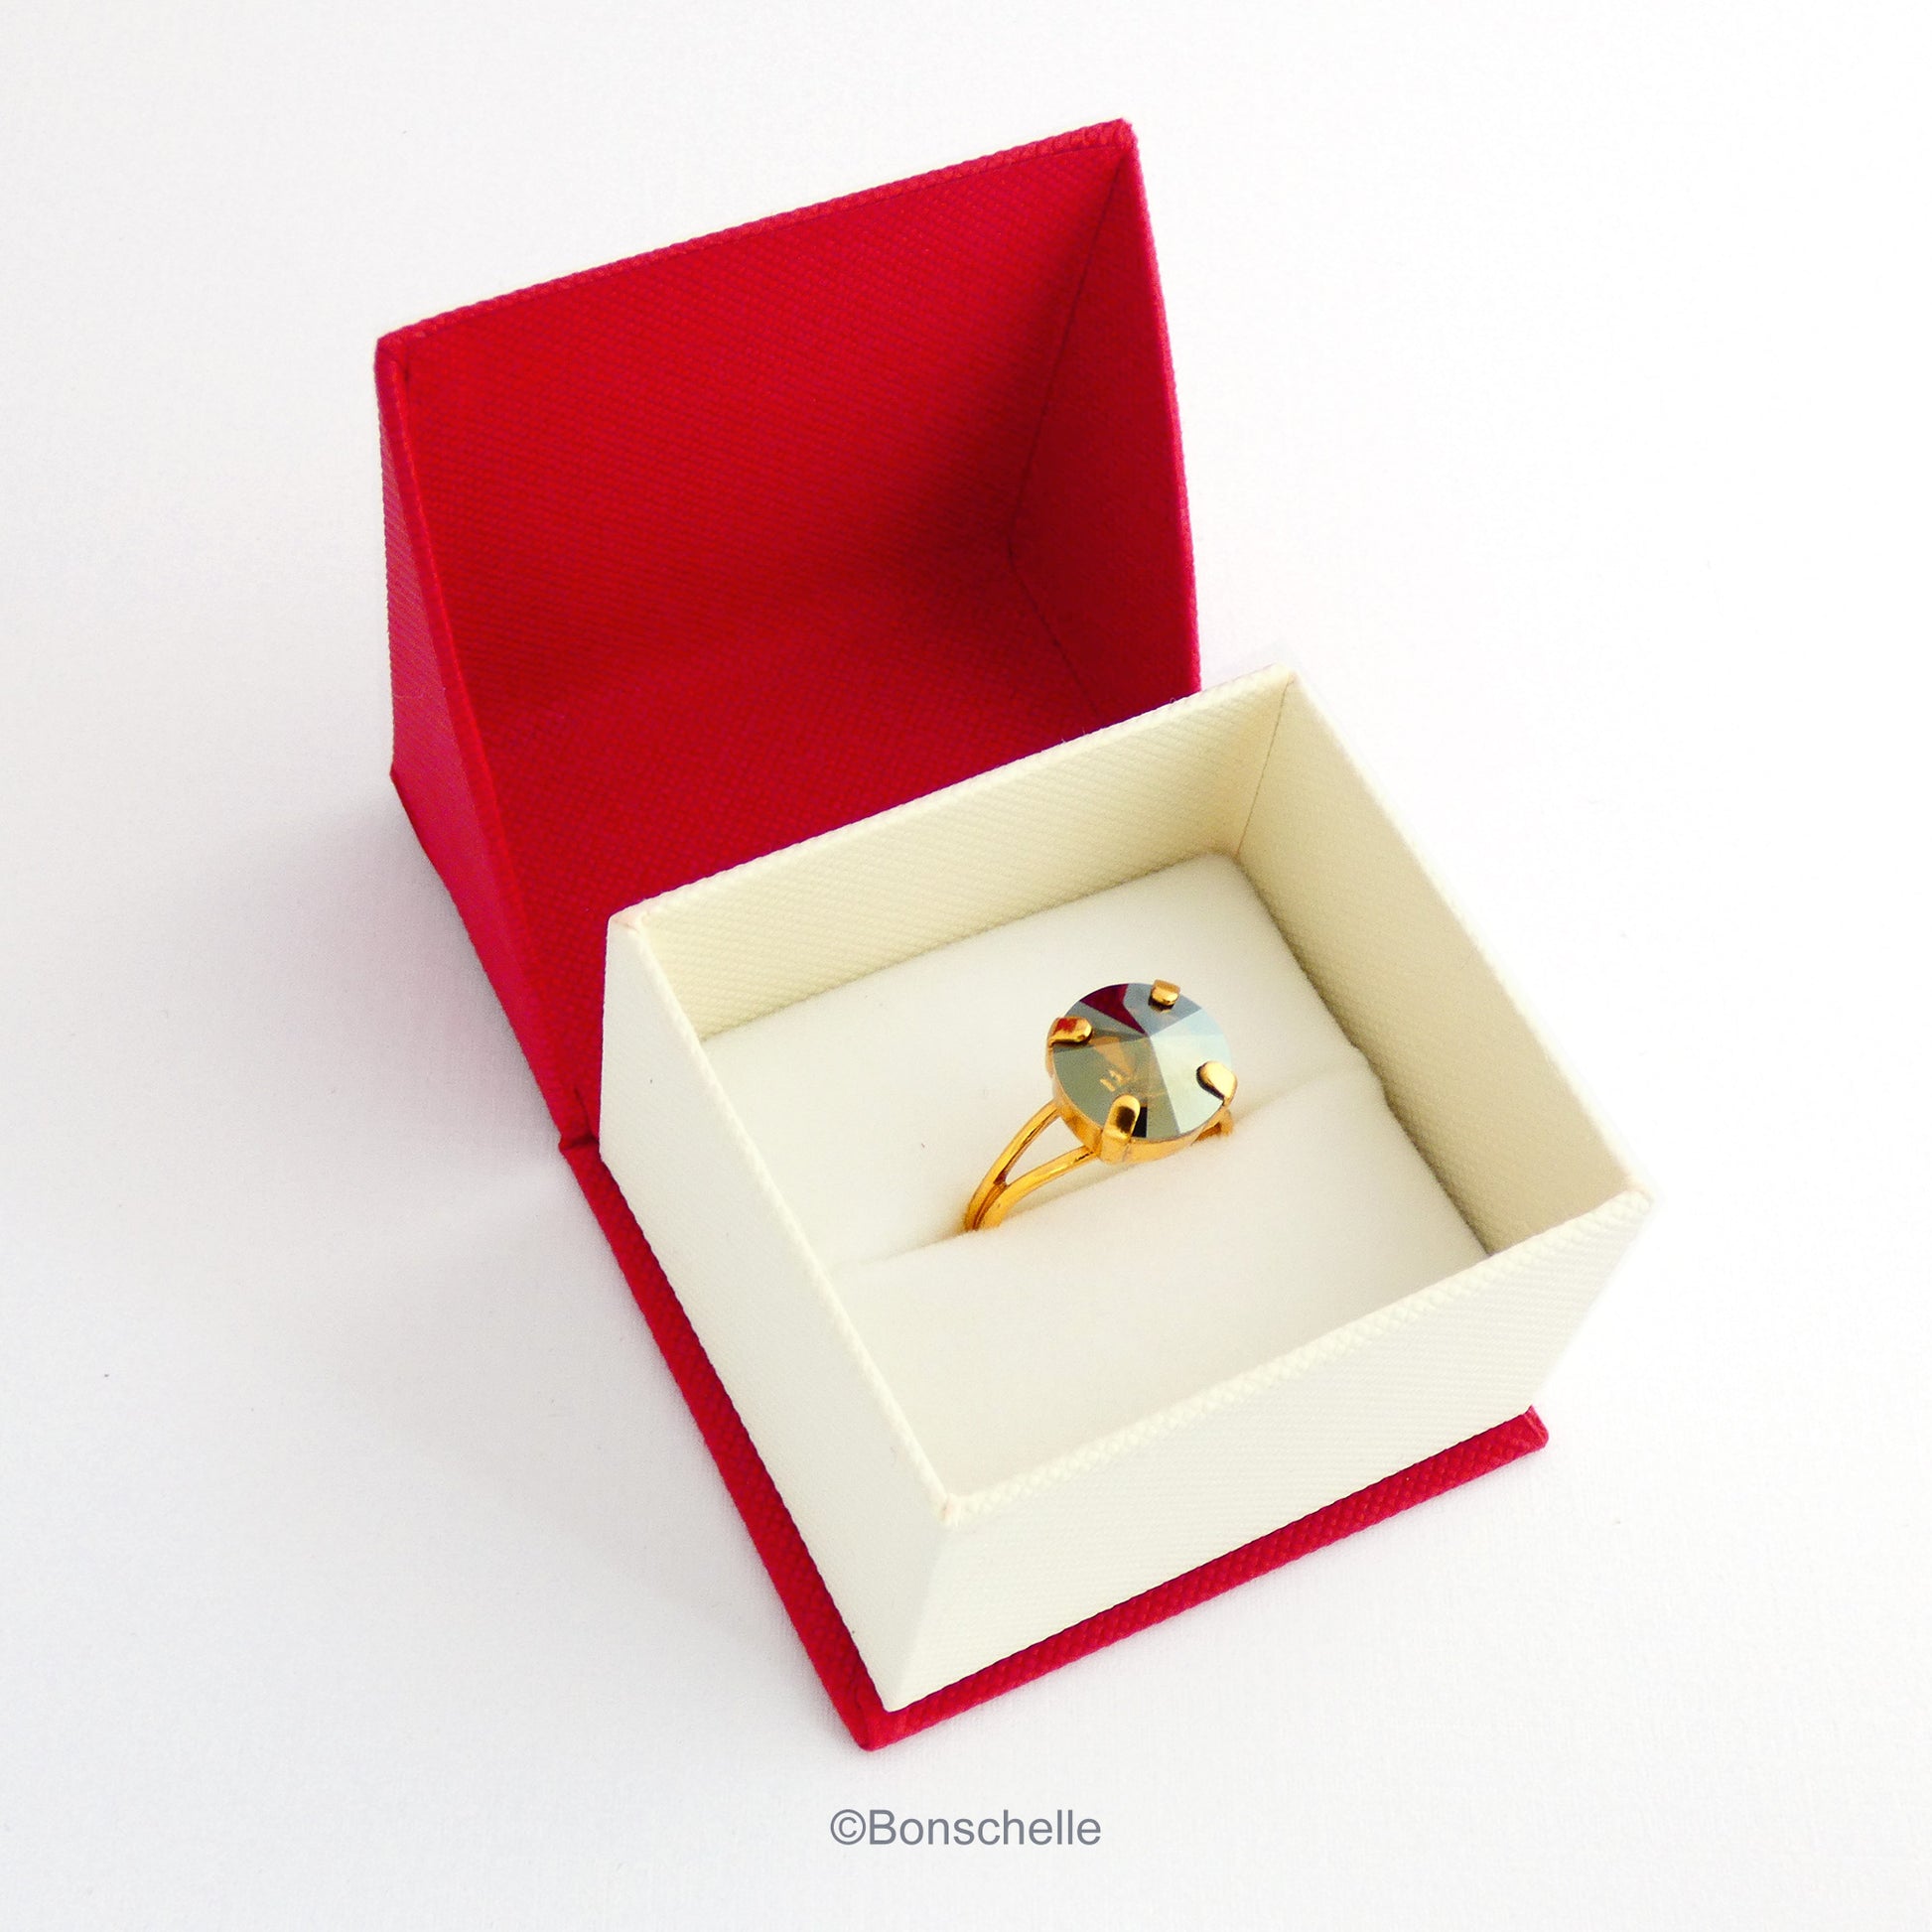 The 24K gold plated solitaire ring for women with a deep bronze Swarovksi crystal stone shown in the jewellery box.